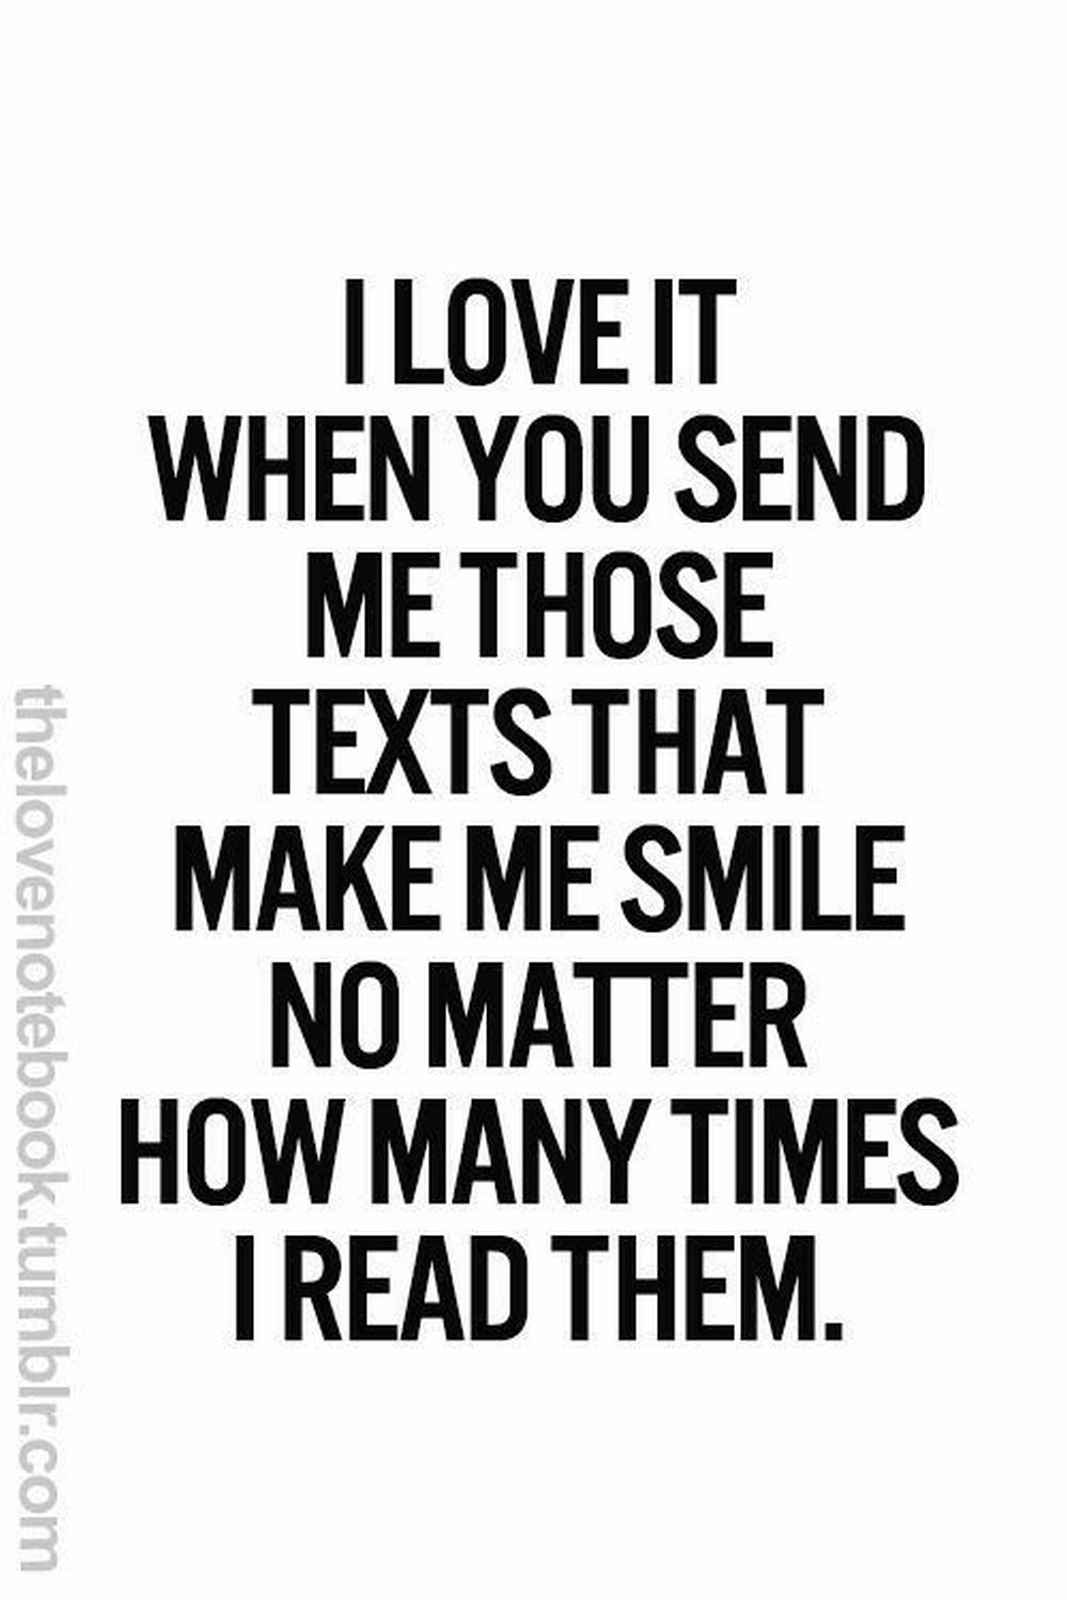 55 Romantic Quotes - "I love it when you send me those texts that make me smile no matter how many times I read them."